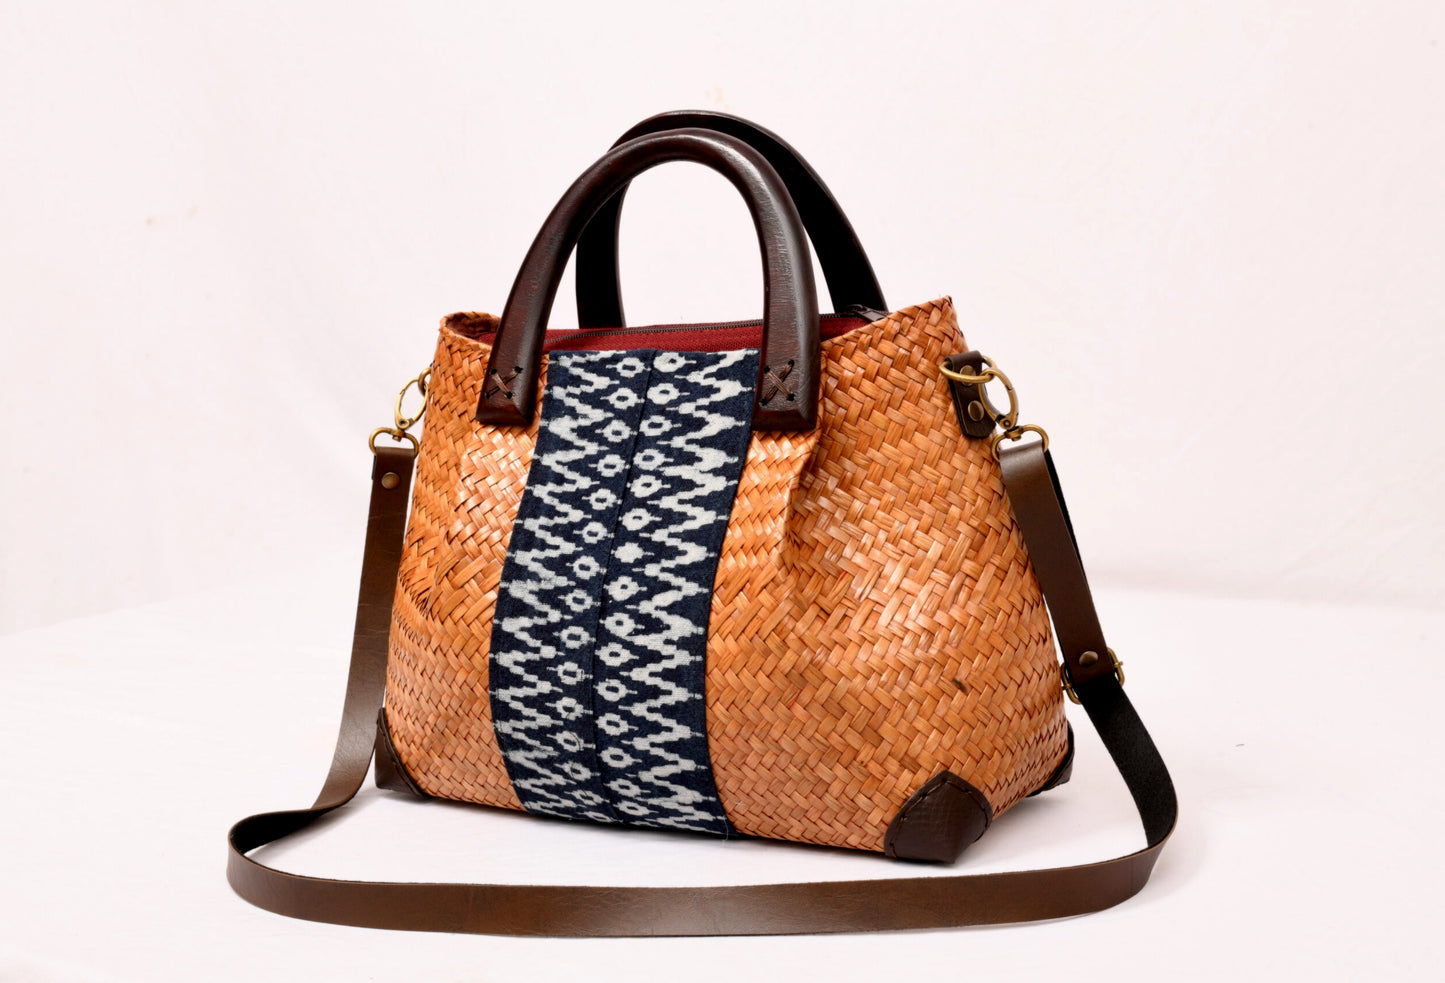 Blue and Tan Woven Straw Bag